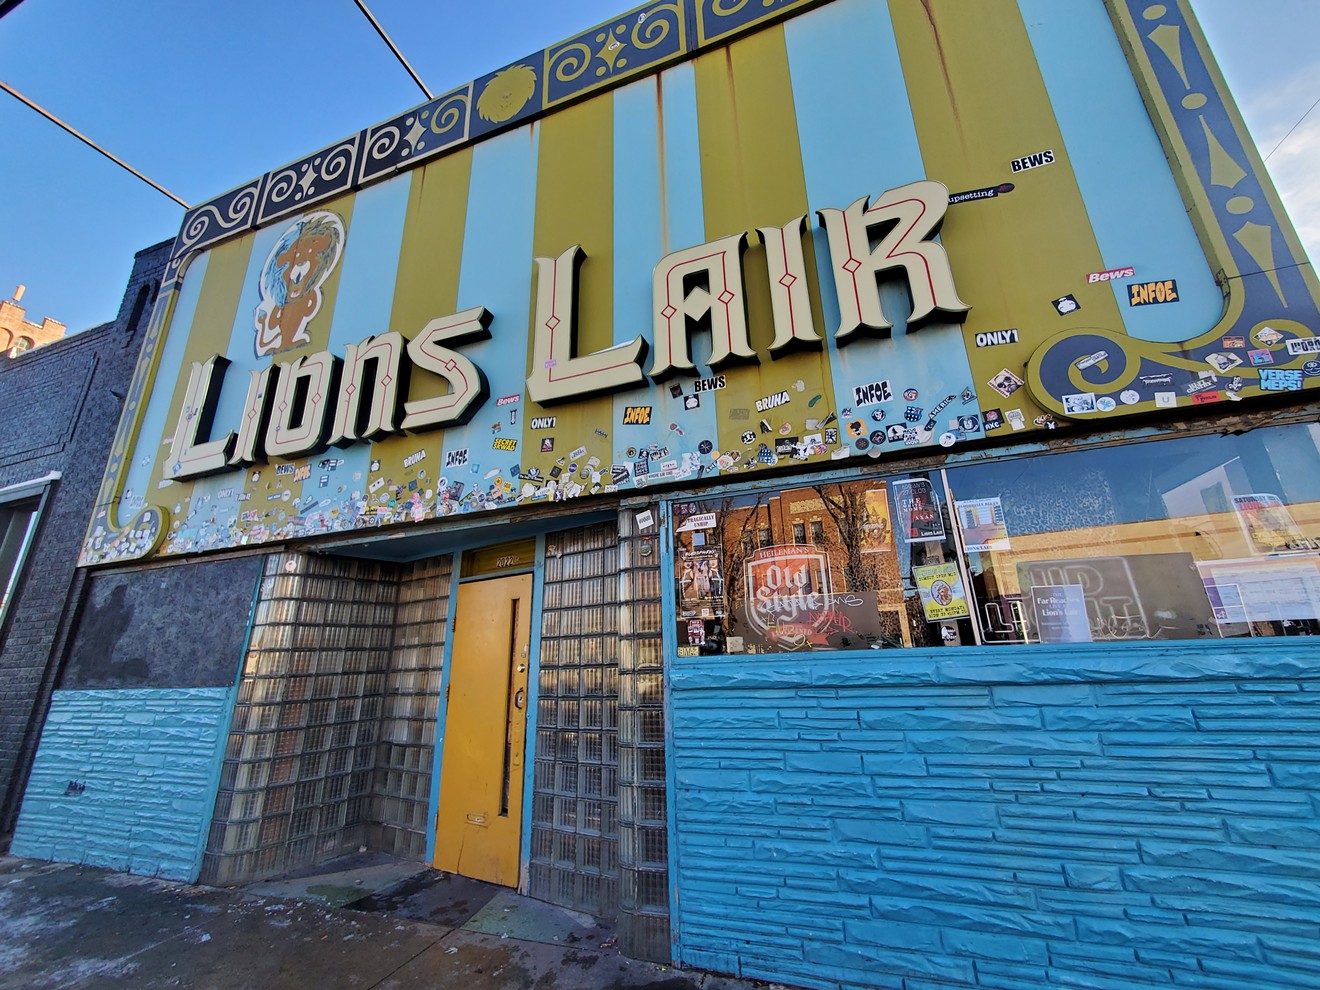 Lion's Lair just signed a new ten-year lease.